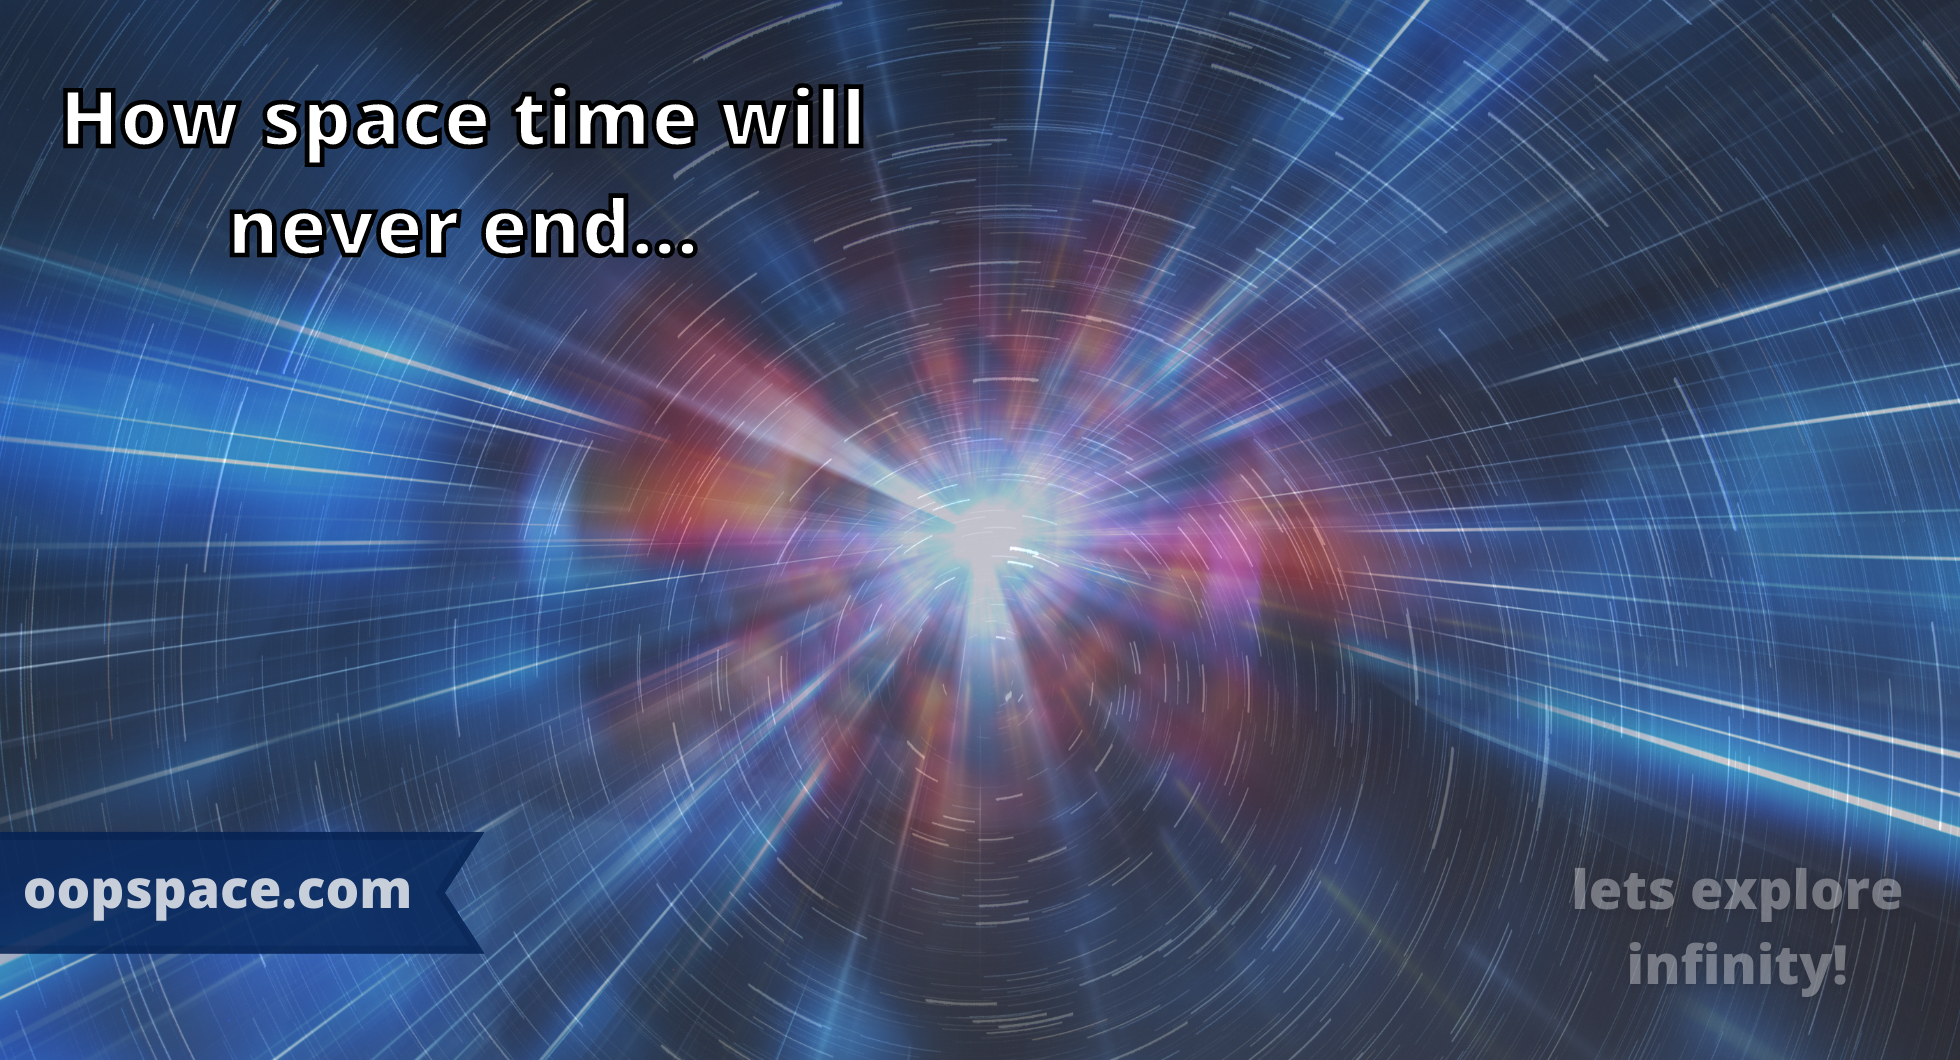 Space time end